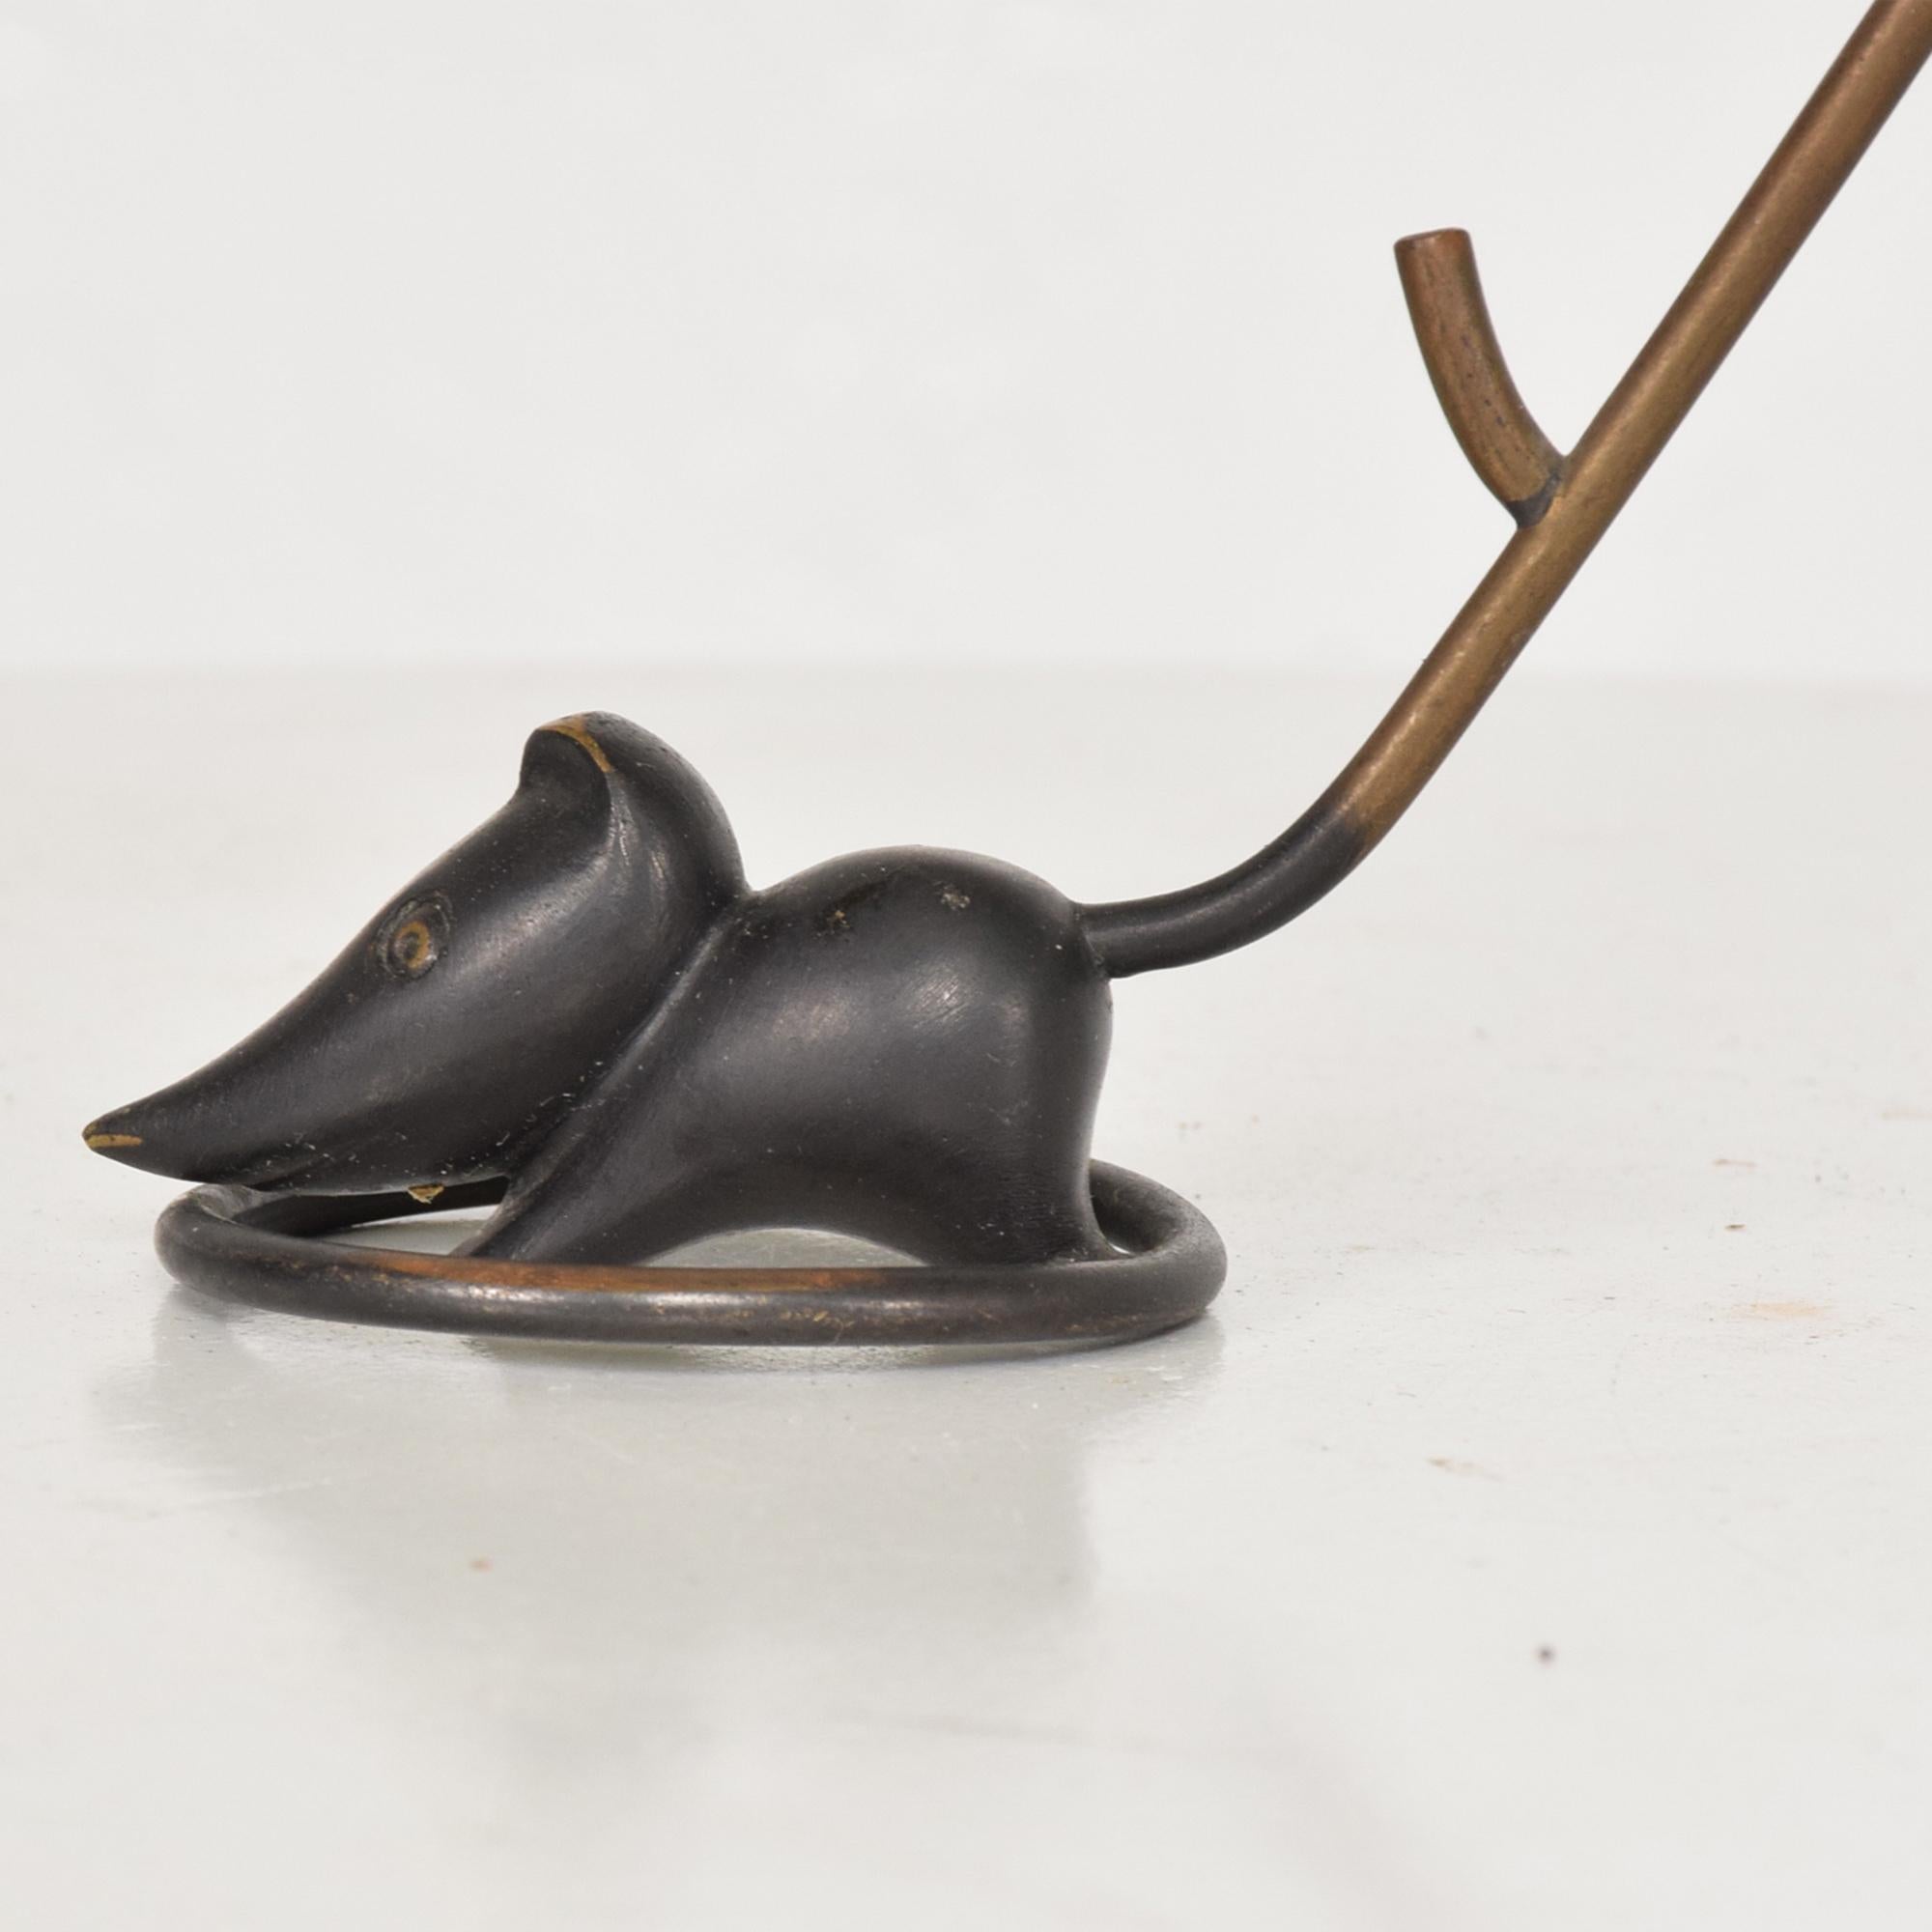 Solid bronze mouse sculpture jewelry ring holder or paperweight by Richard Rohac.
Austrian Modernism 1940s
Signed R.R Richard Rohac Made in Austria
Measures: 8 1/8 H x 3 1/4 L x 5/8 inches wide across the mouse
Original unrestored vintage